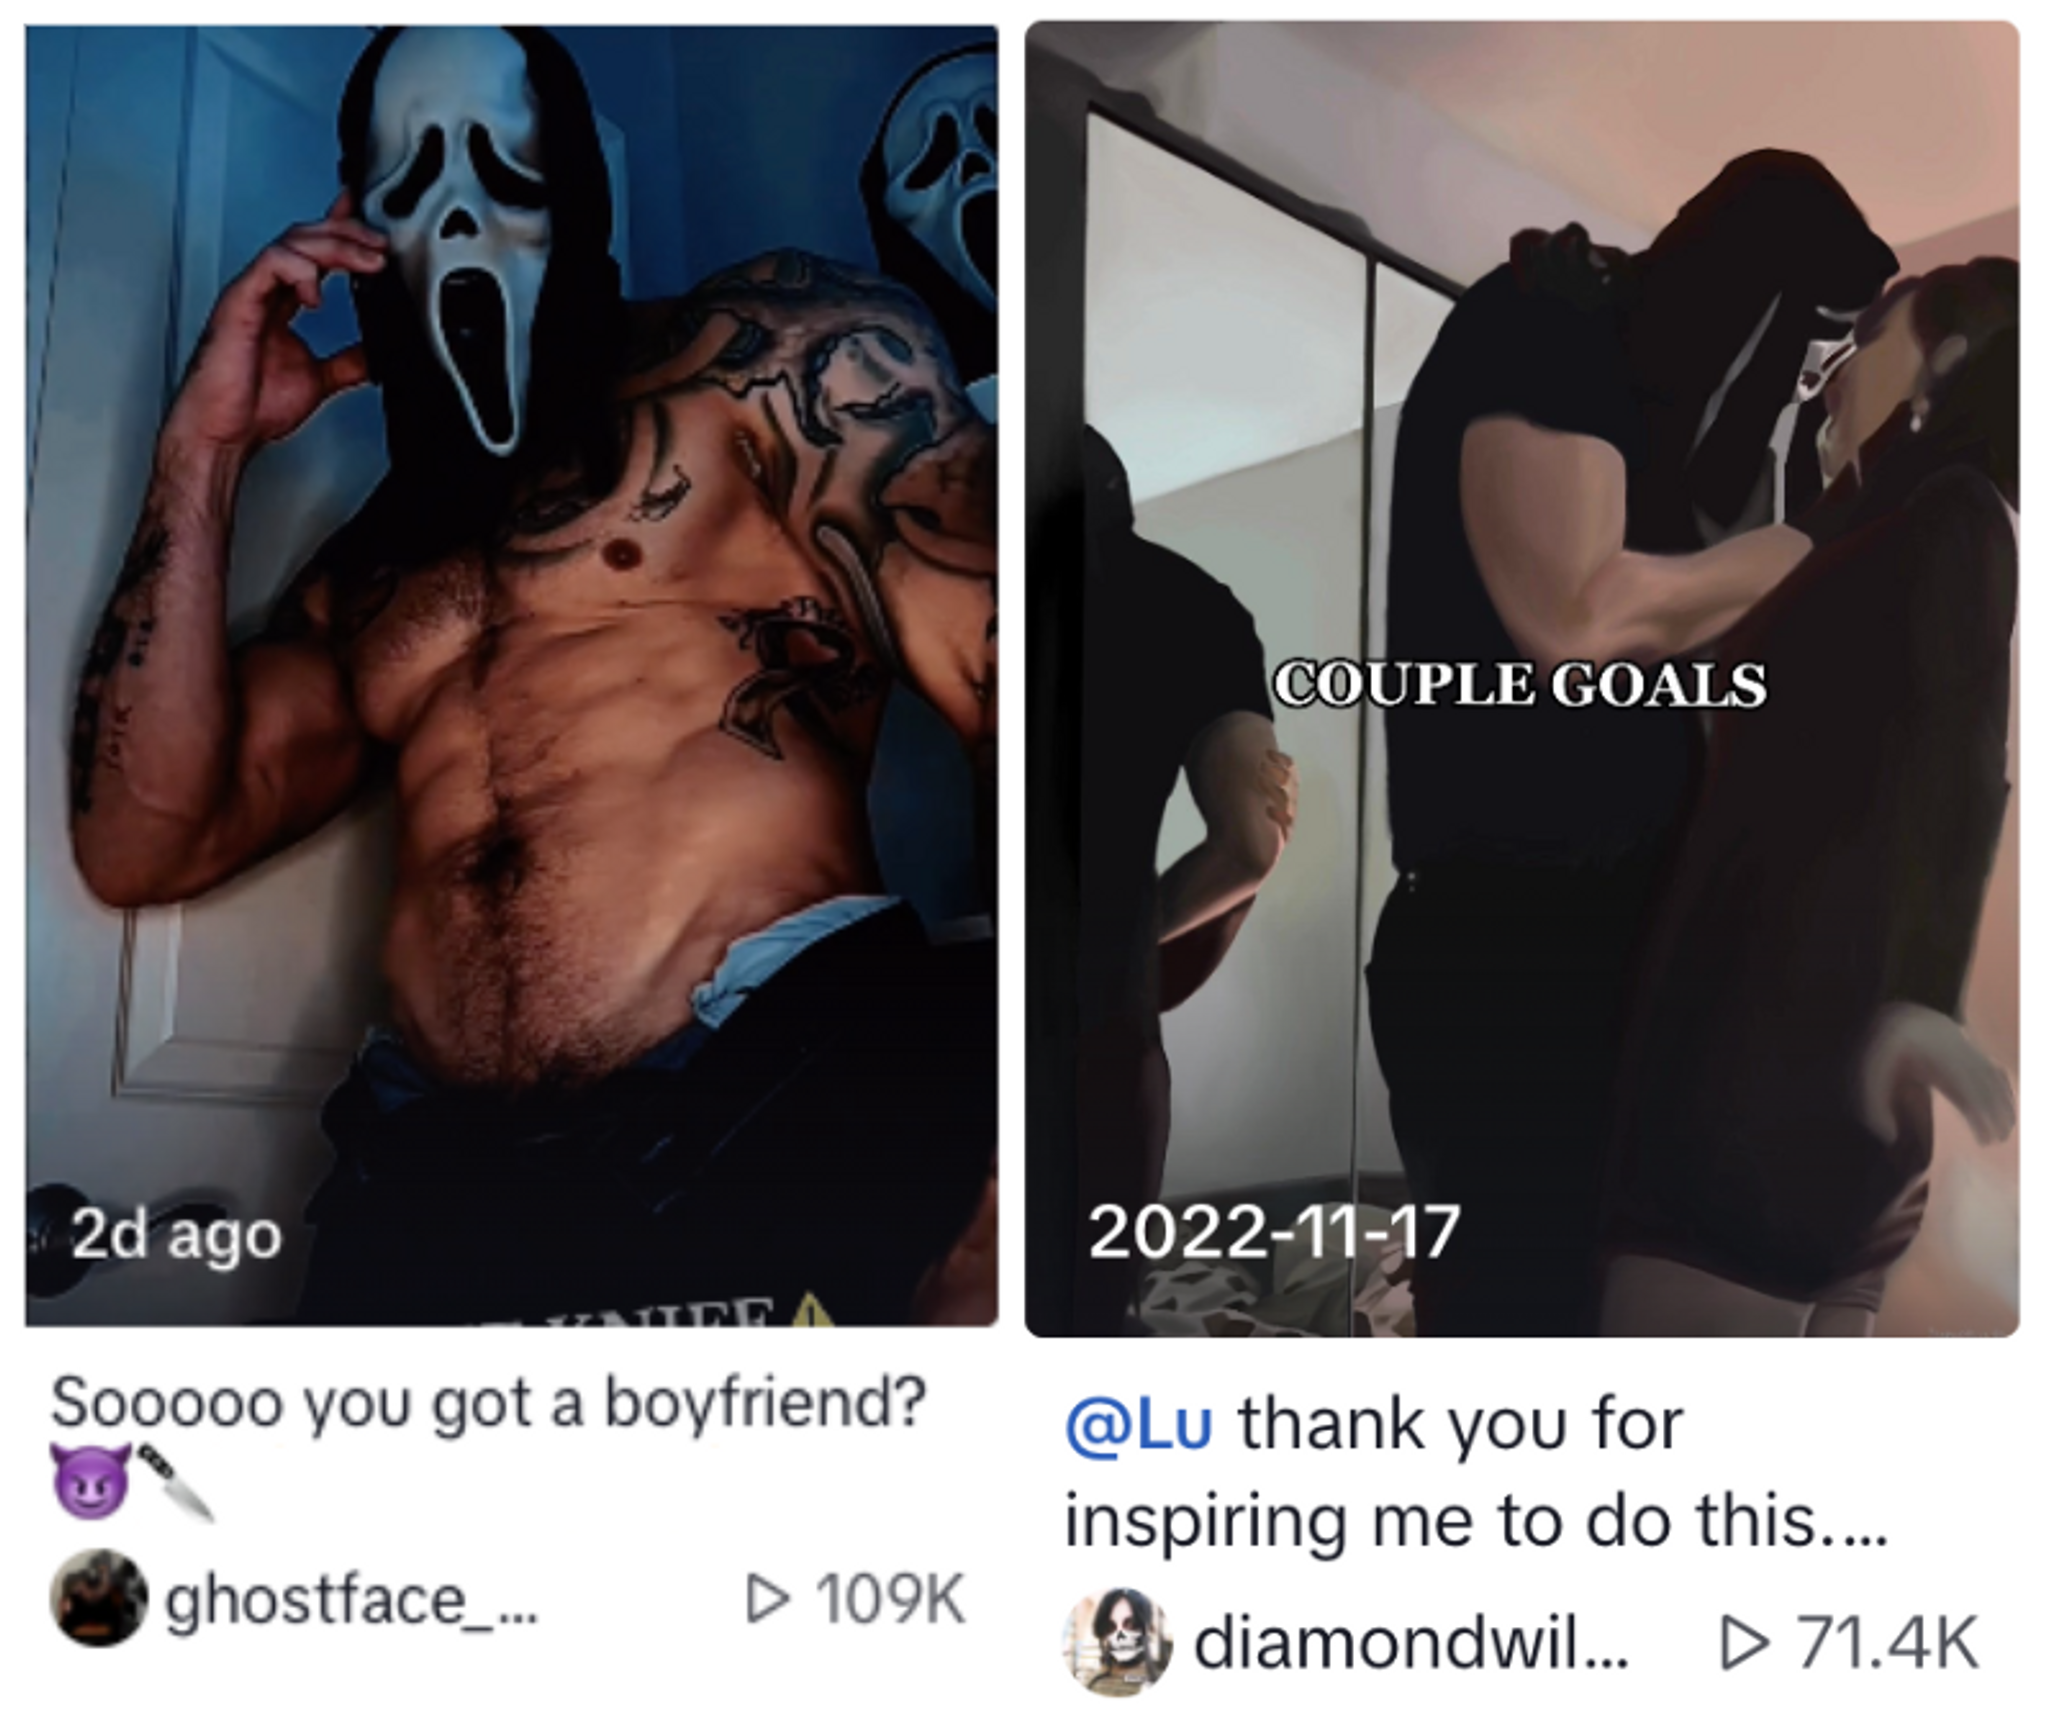 The Ghostface trend ignites erotic macabre among Gen Z